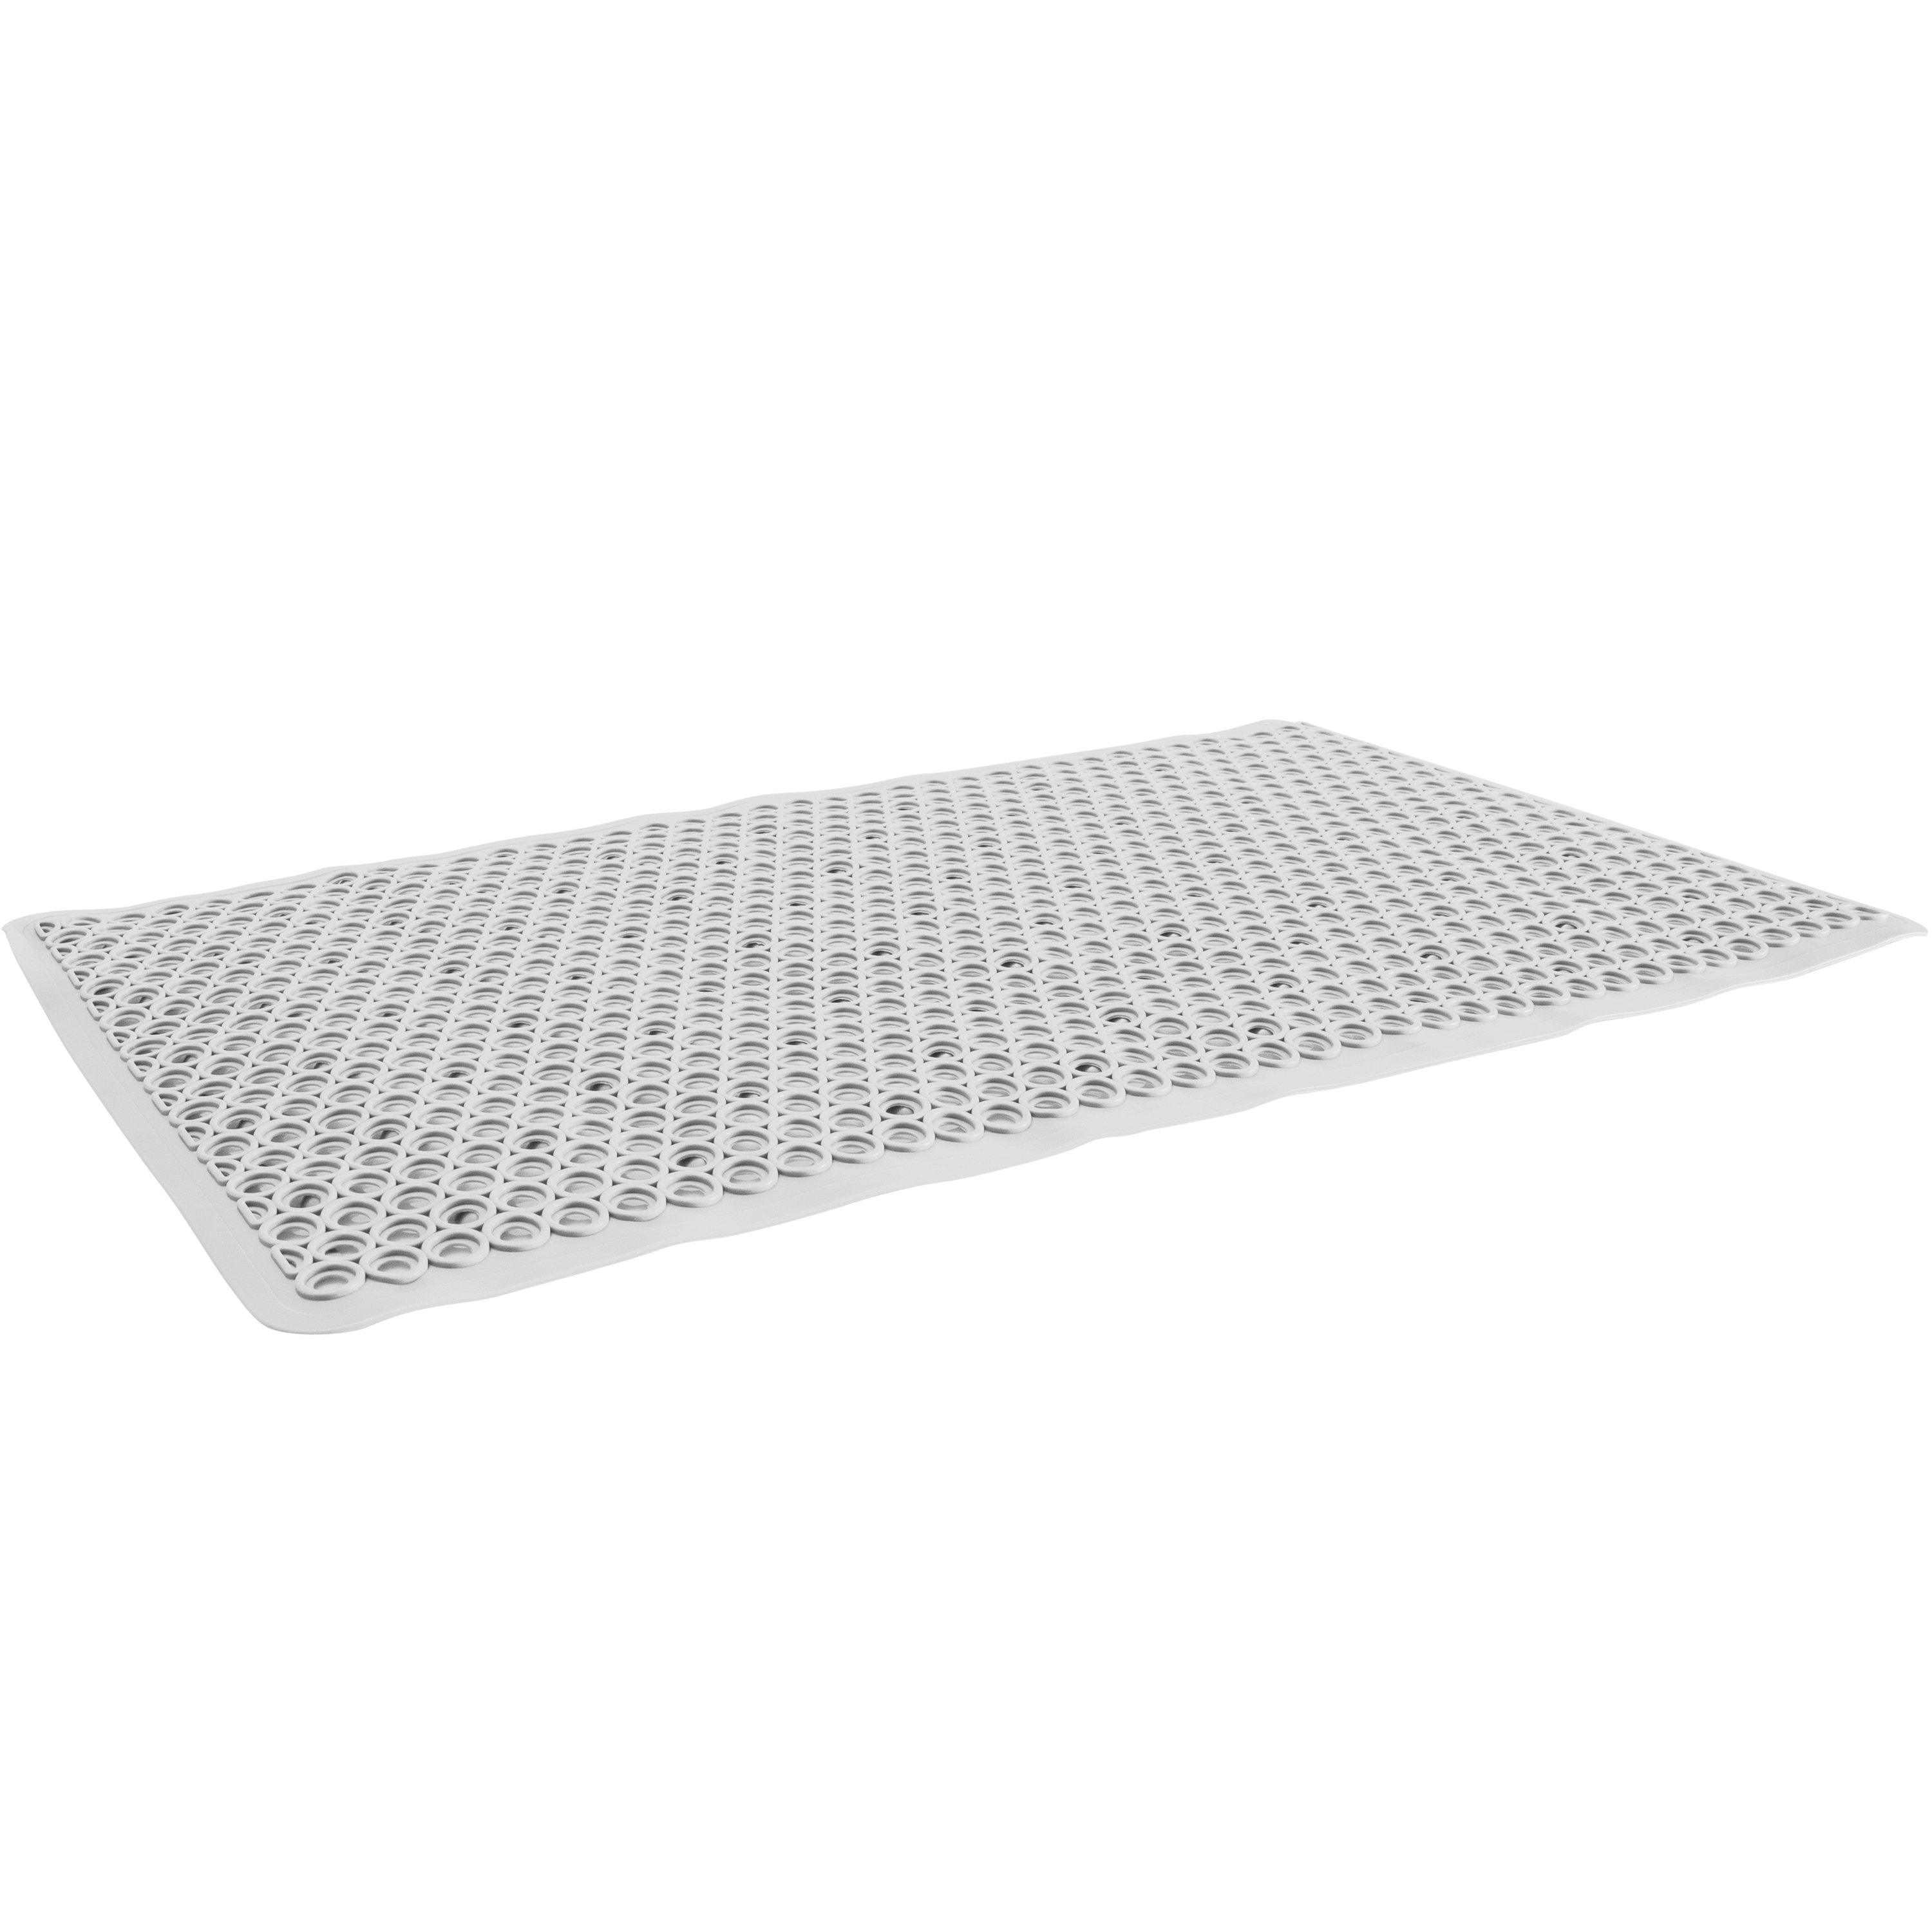 Microwave Splatter Cover Keeps Your Microwave Spotless, BA291 - On Sale -  Bed Bath & Beyond - 32200885